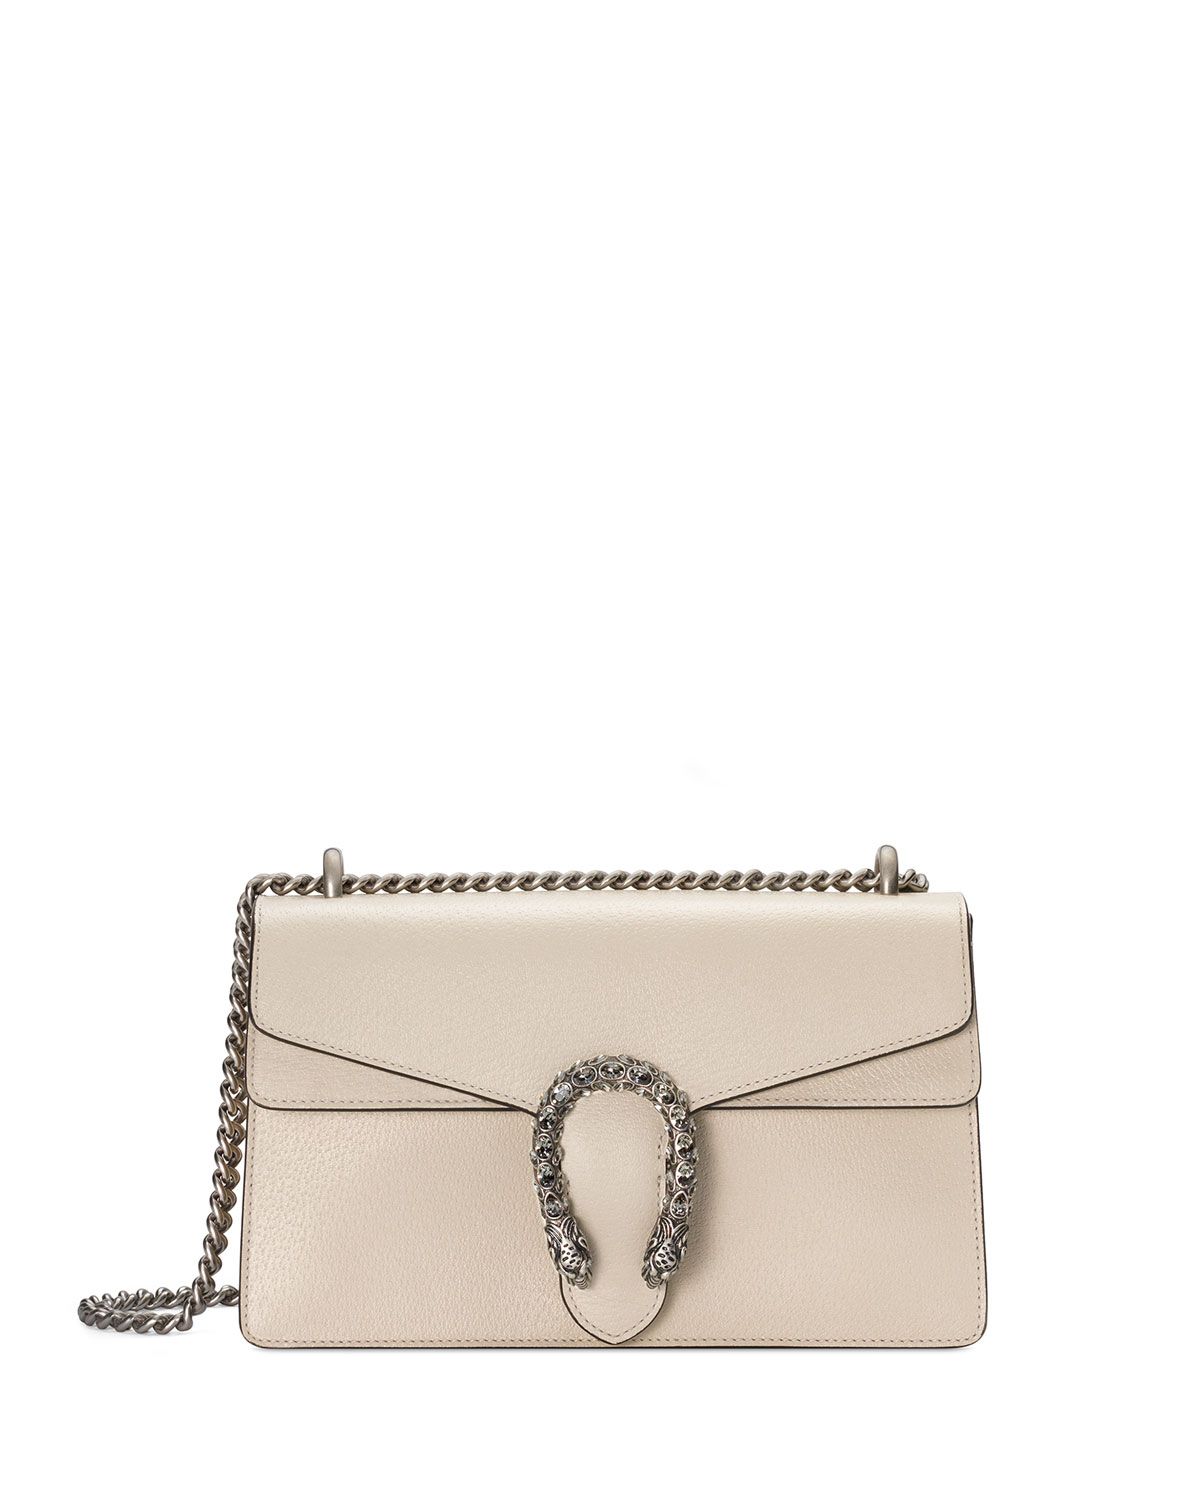 Dionysus Small Leather Shoulder Bag | Neiman Marcus